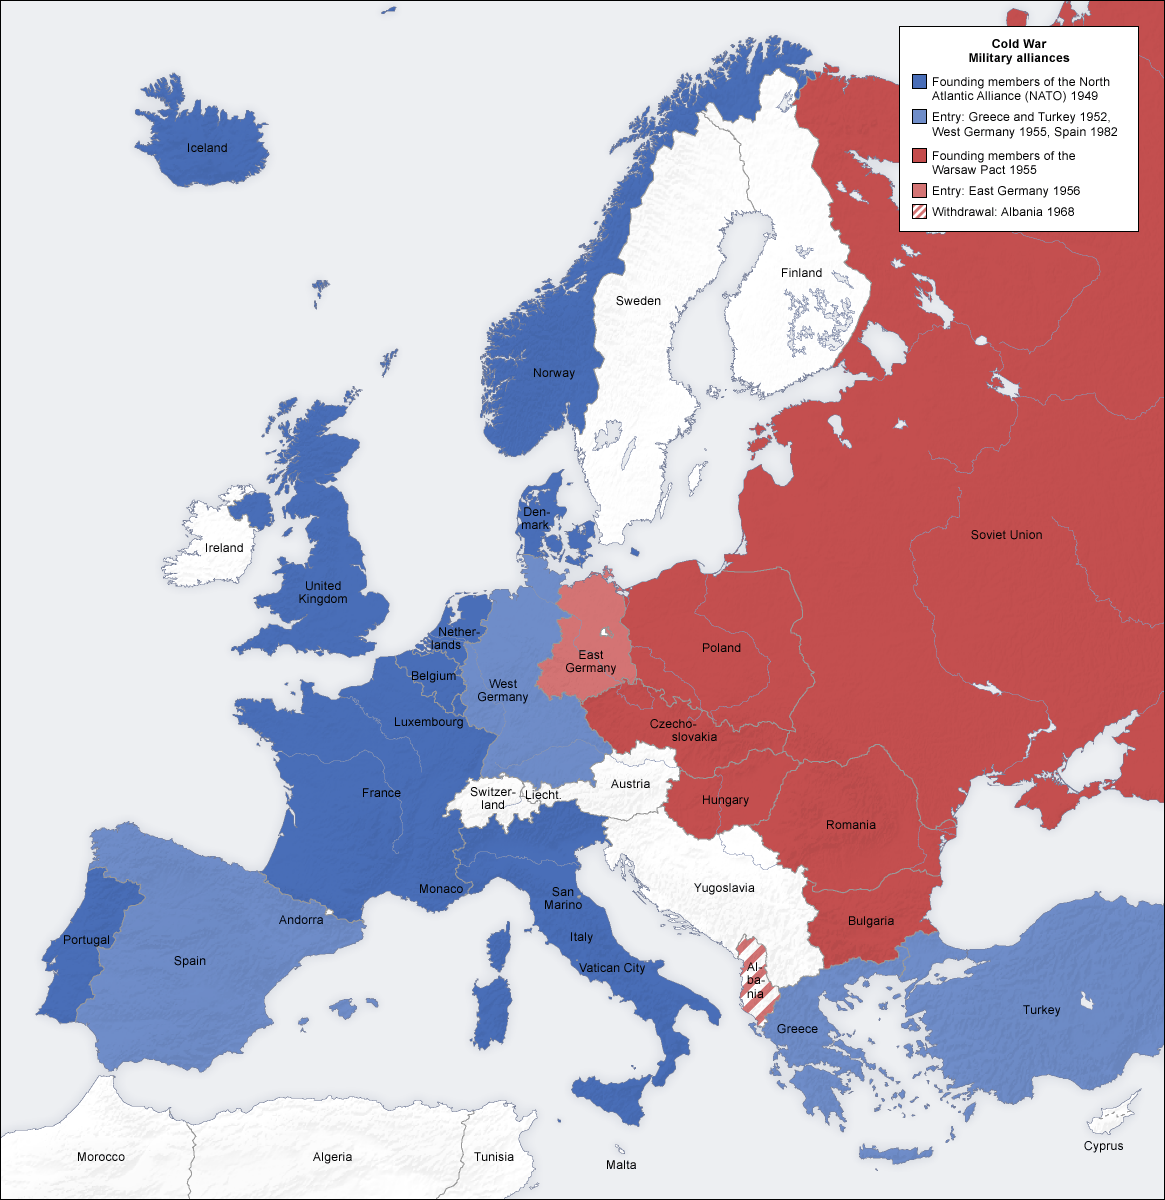 Map of Europe with countries shaded based on membership in NATO, the Warsaw Pact or nonaligned.